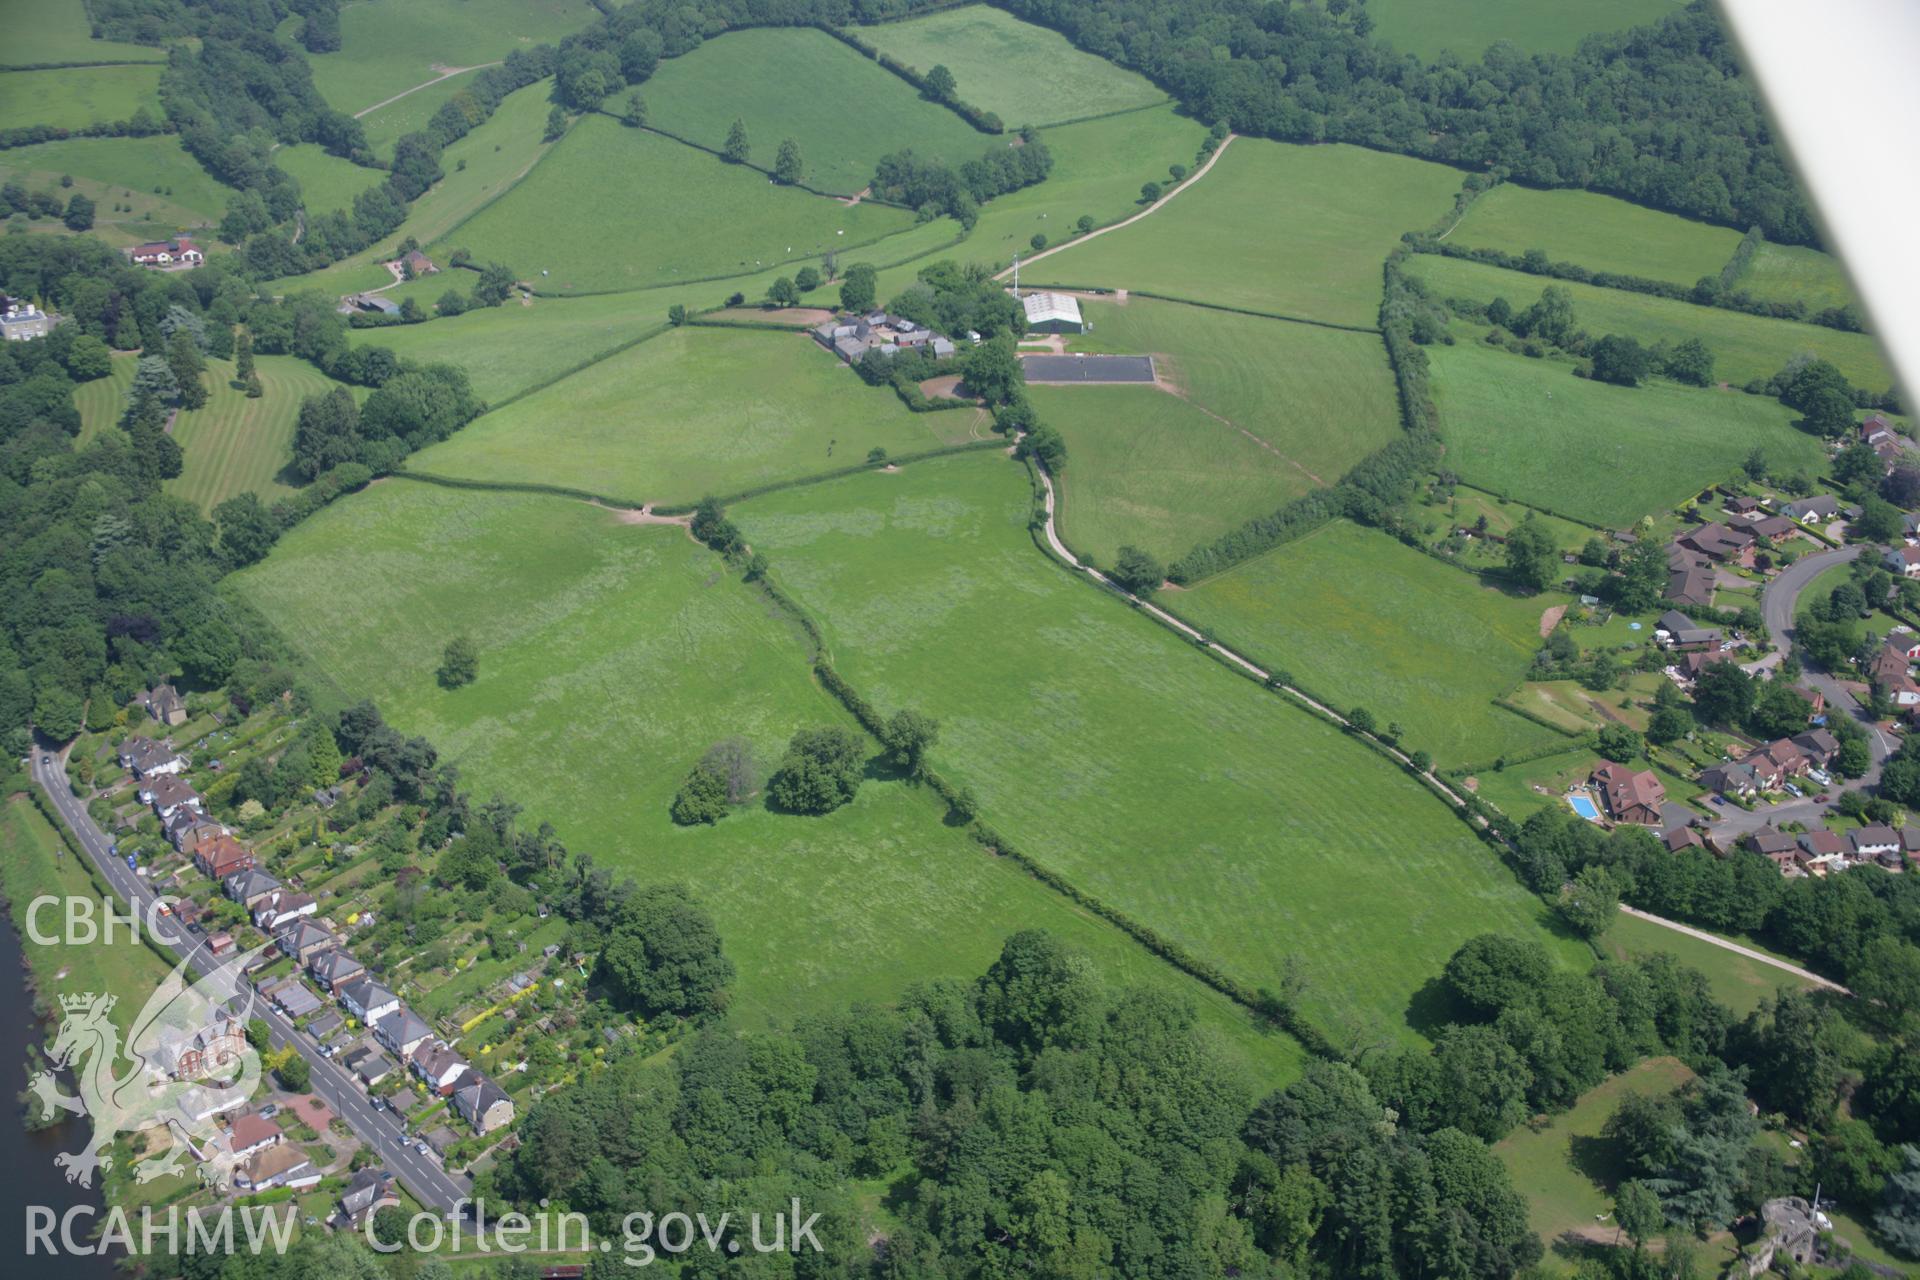 RCAHMW colour oblique aerial photograph of the site of a battle at Pwll Melyn, Usk and the landscape to the north-east. Taken on 09 June 2006 by Toby Driver.